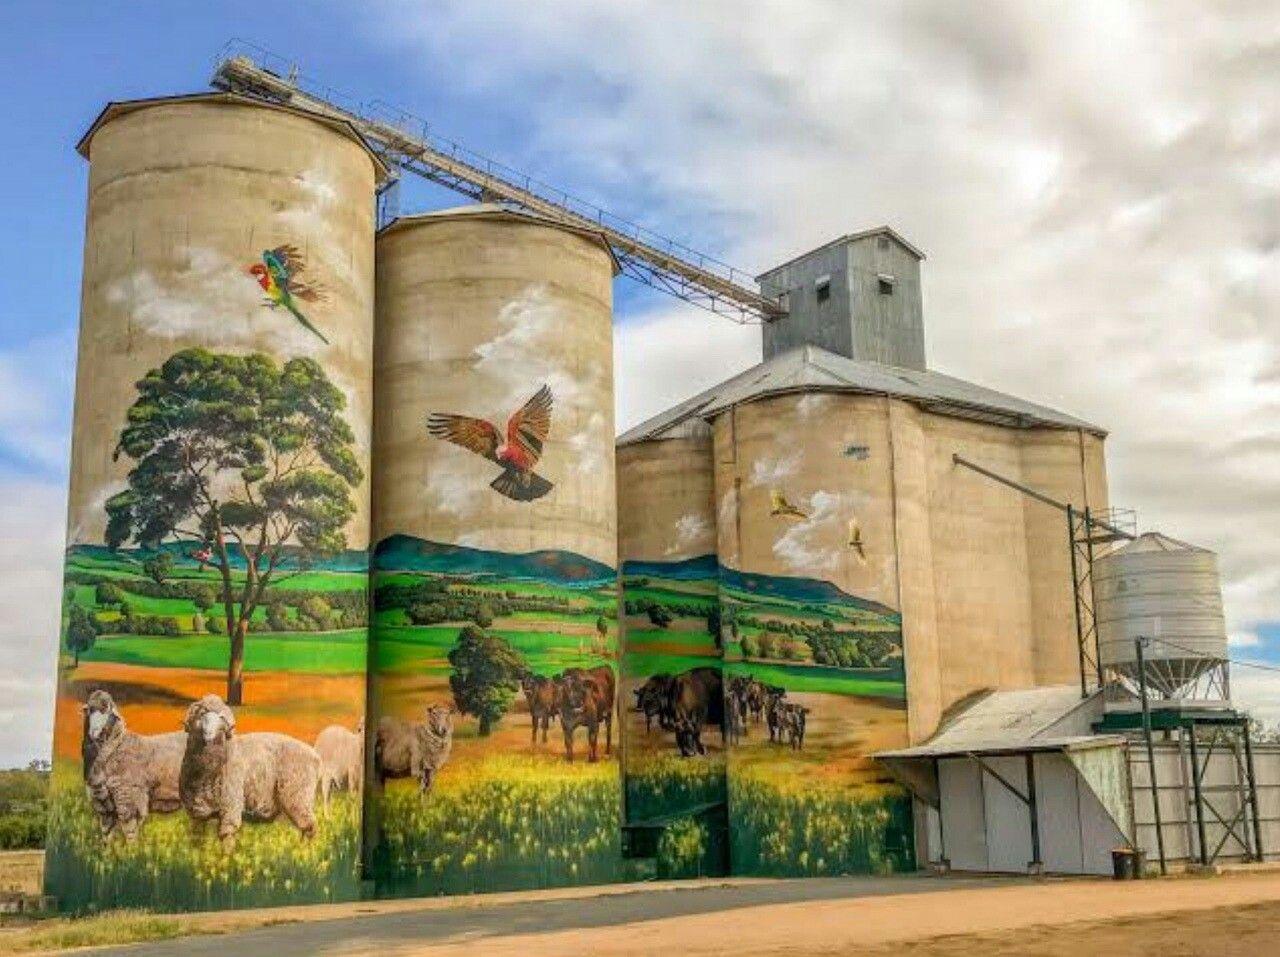 The Grenfell Commodities Silos are part of the NSW silo art trail.